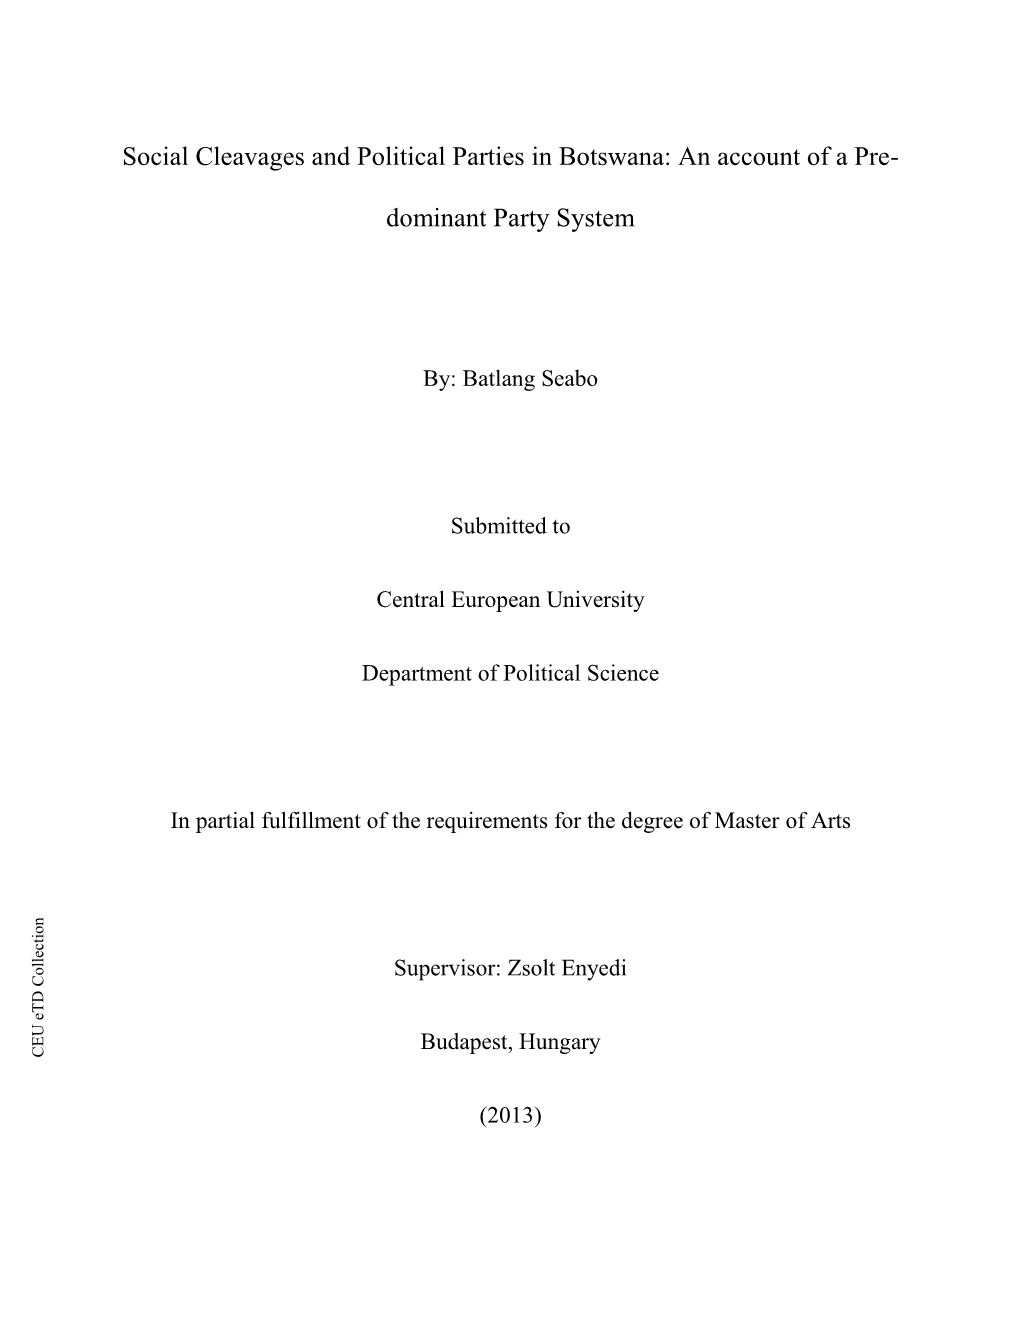 Social Cleavages and Political Parties in Botswana: an Account of A